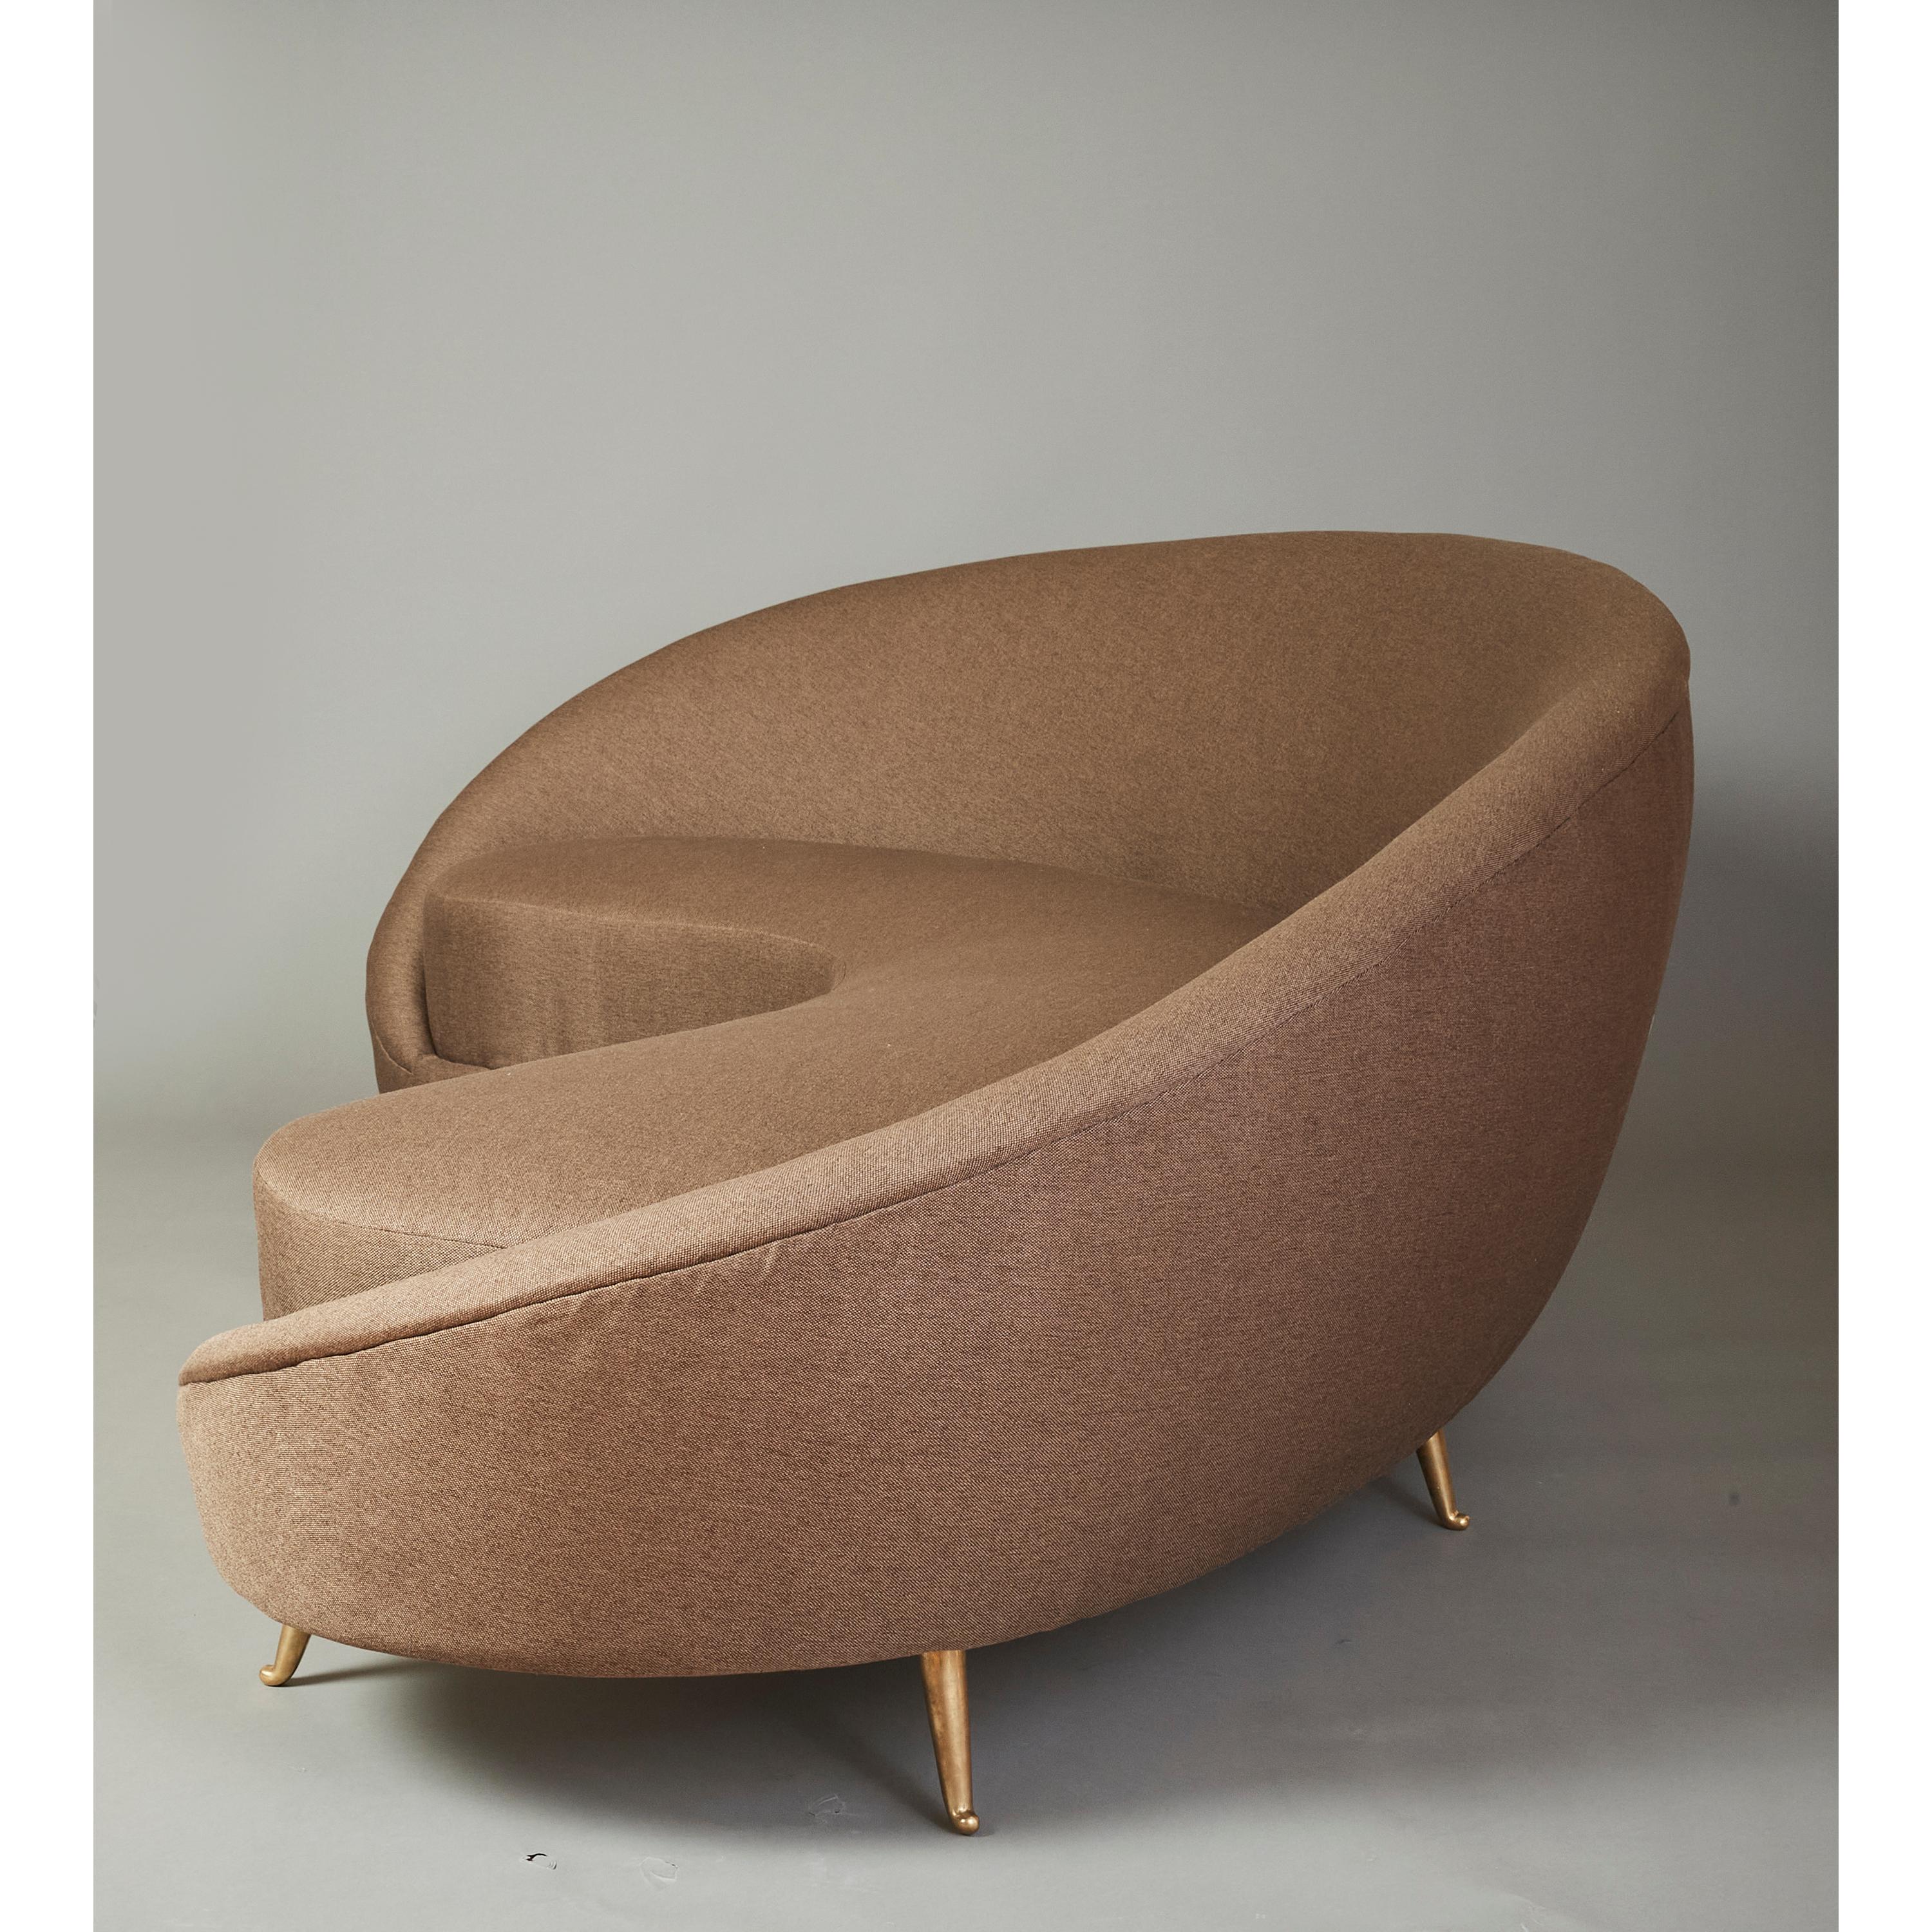 Federico Munari Curved Boomerang Sofa with Polished Brass Legs, Italy 1950's For Sale 2